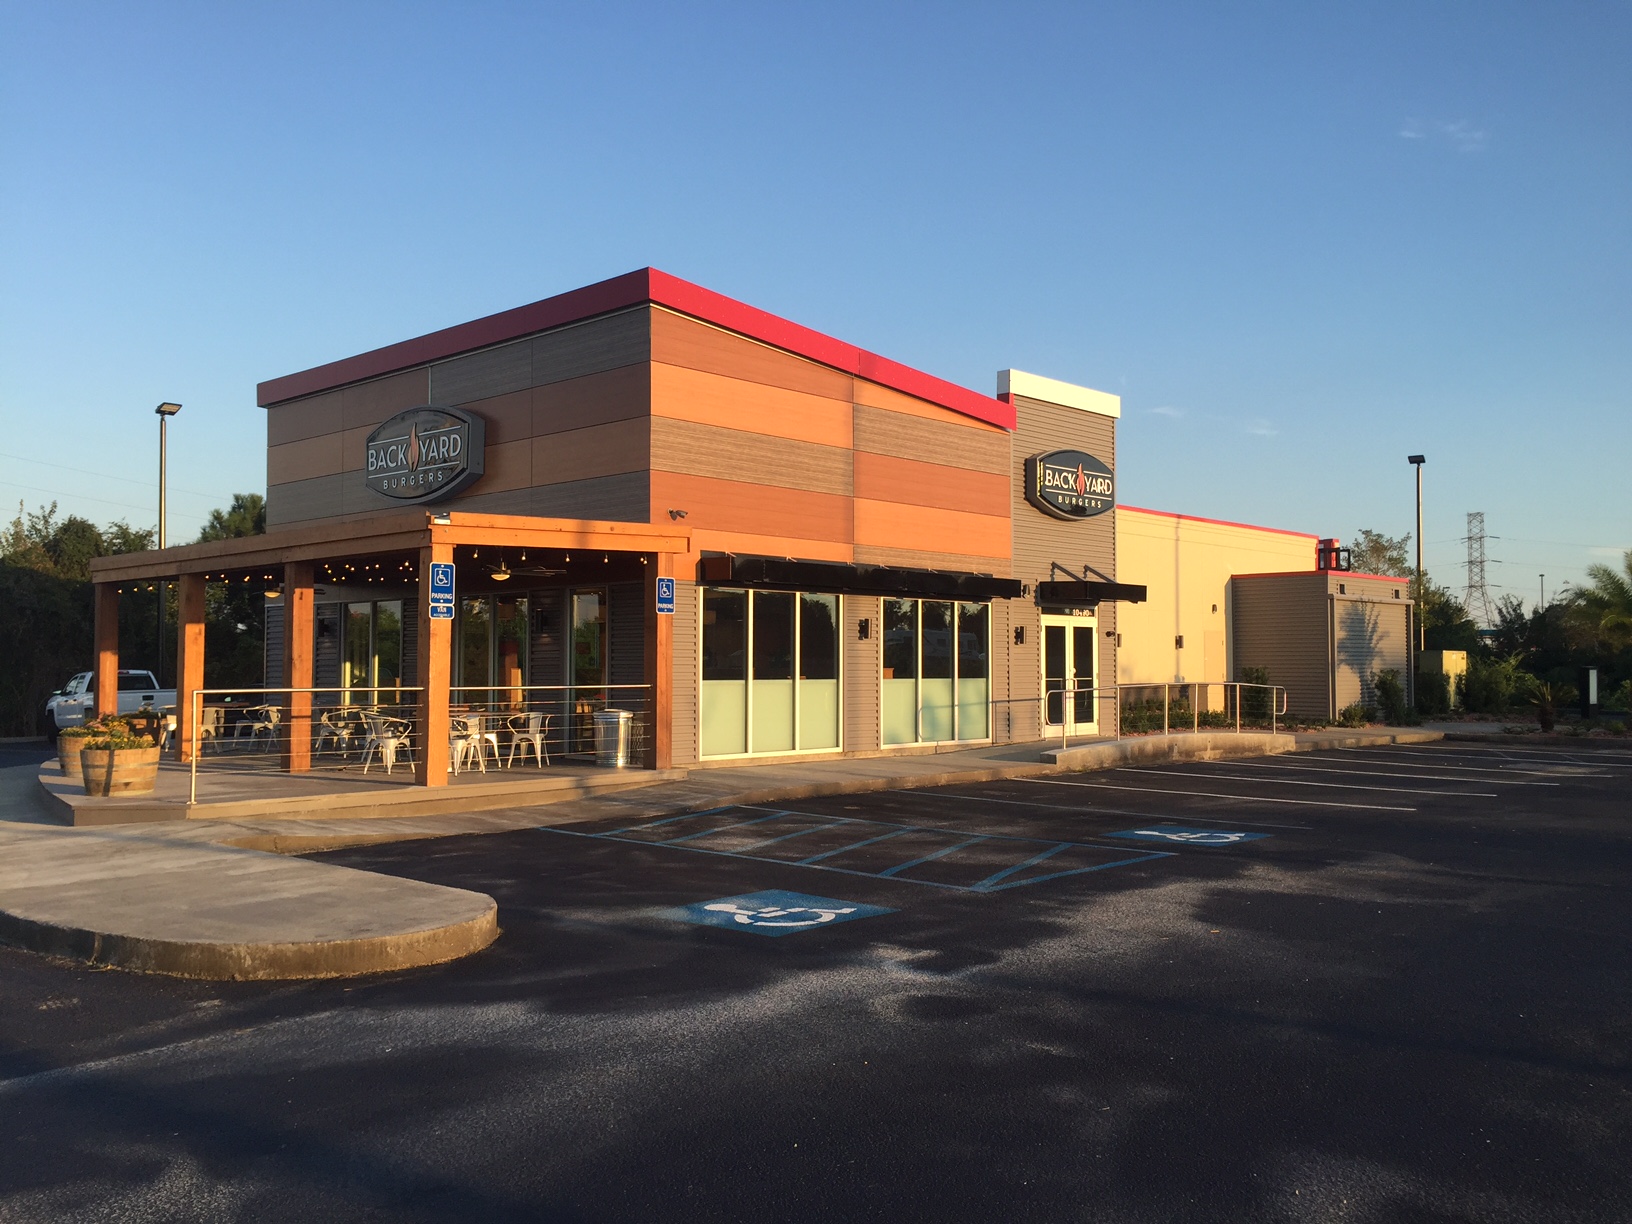 Back Yard Burgers Reveals New Design With Opening In Gulfport MS